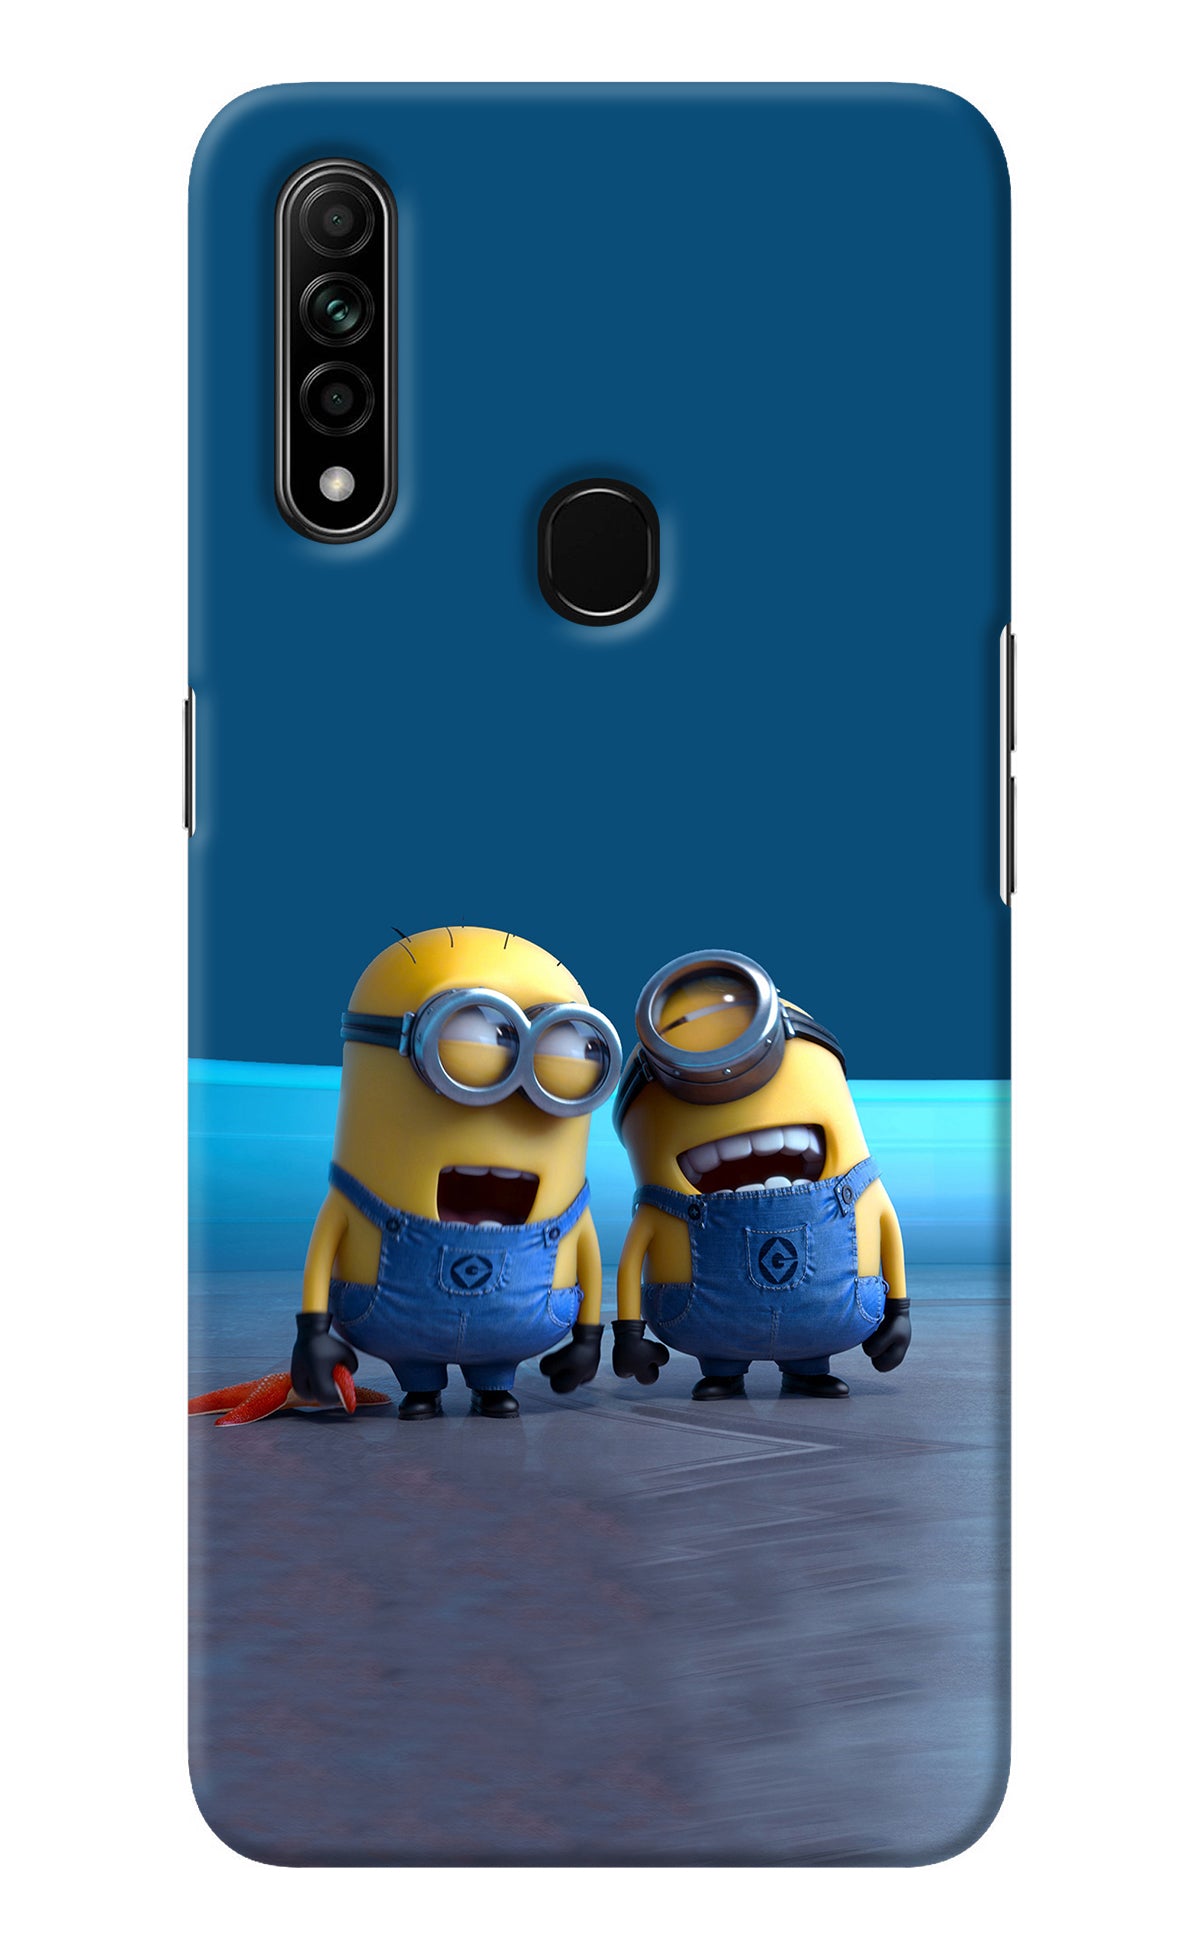 Minion Laughing Oppo A31 Back Cover